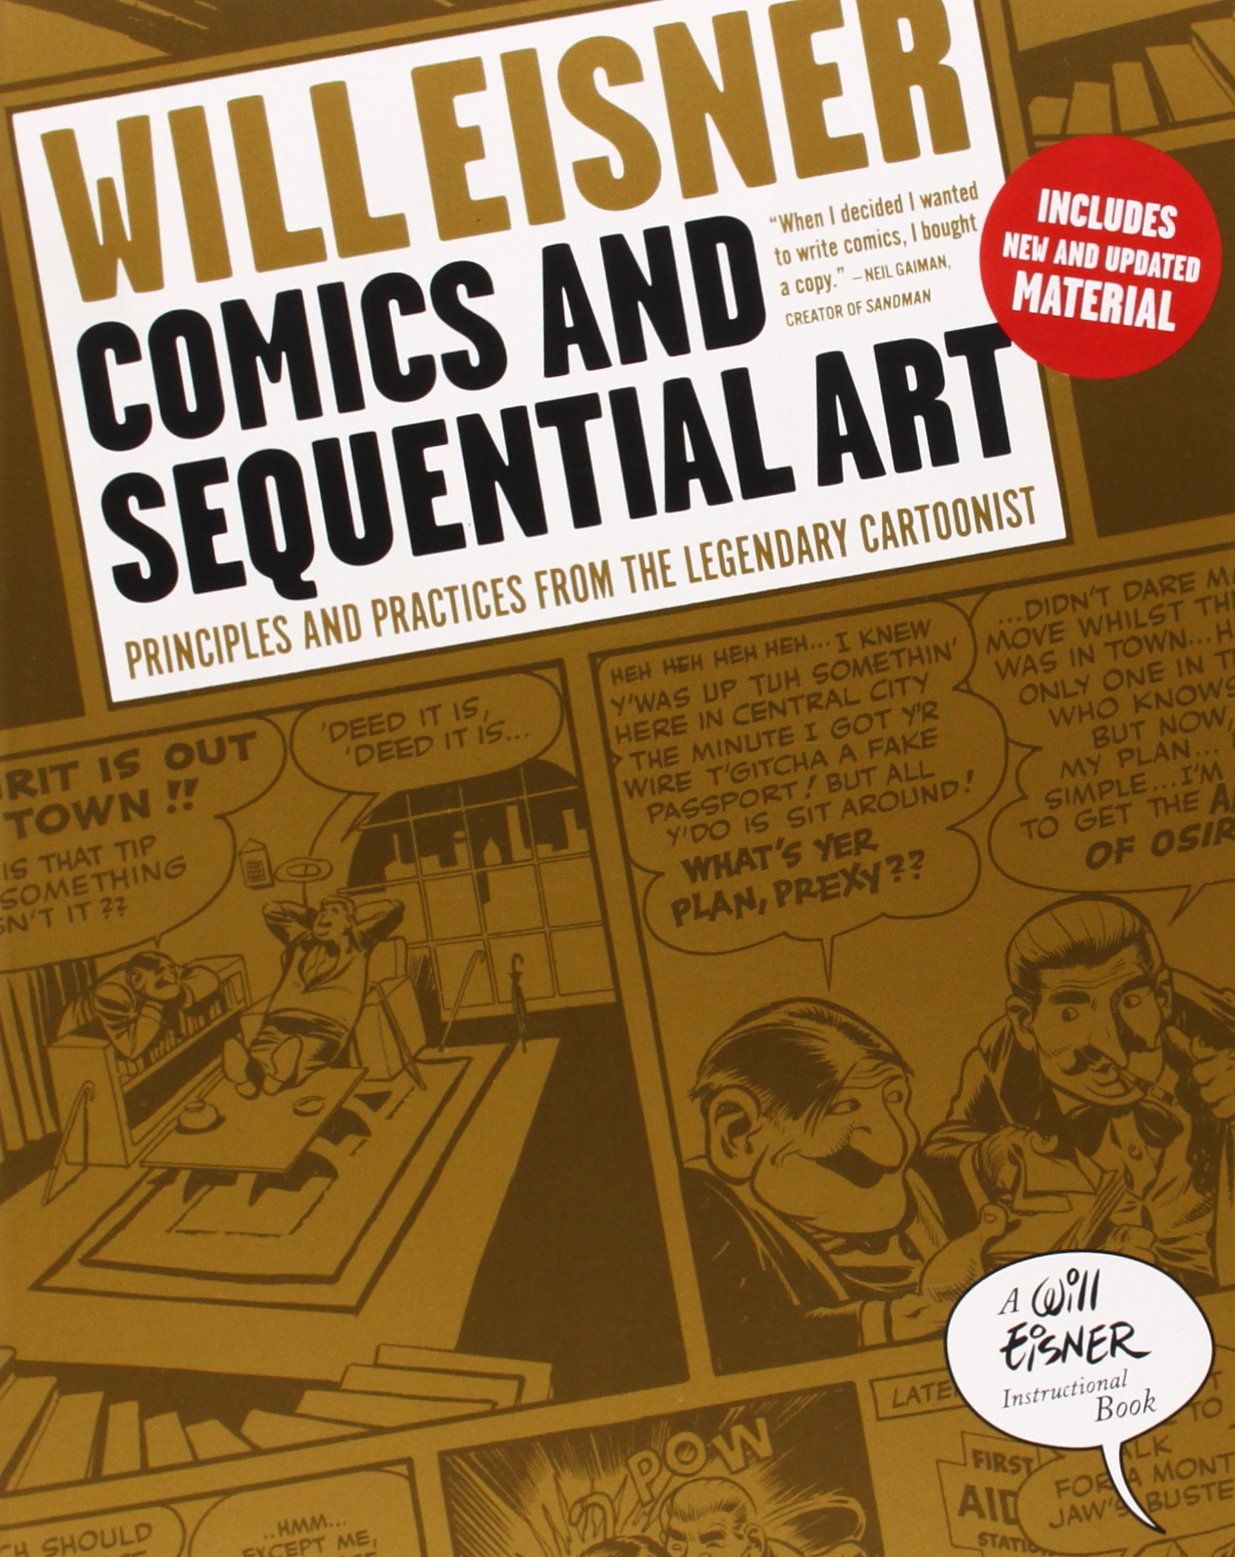 Comics & Sequential Art by Will Eisner